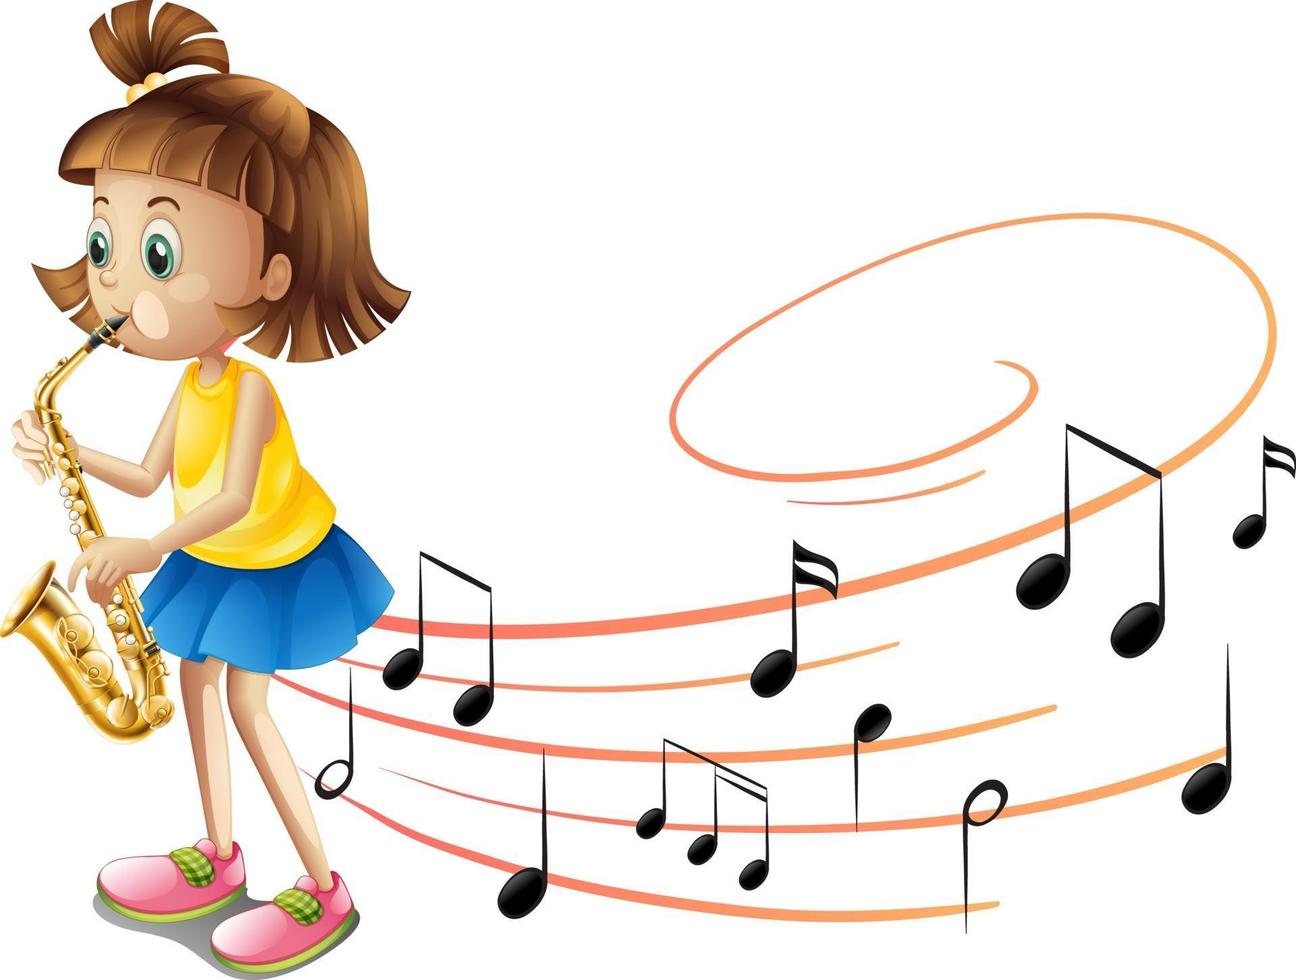 Cartoon character of a girl playing saxophone with musical melody symbols vector